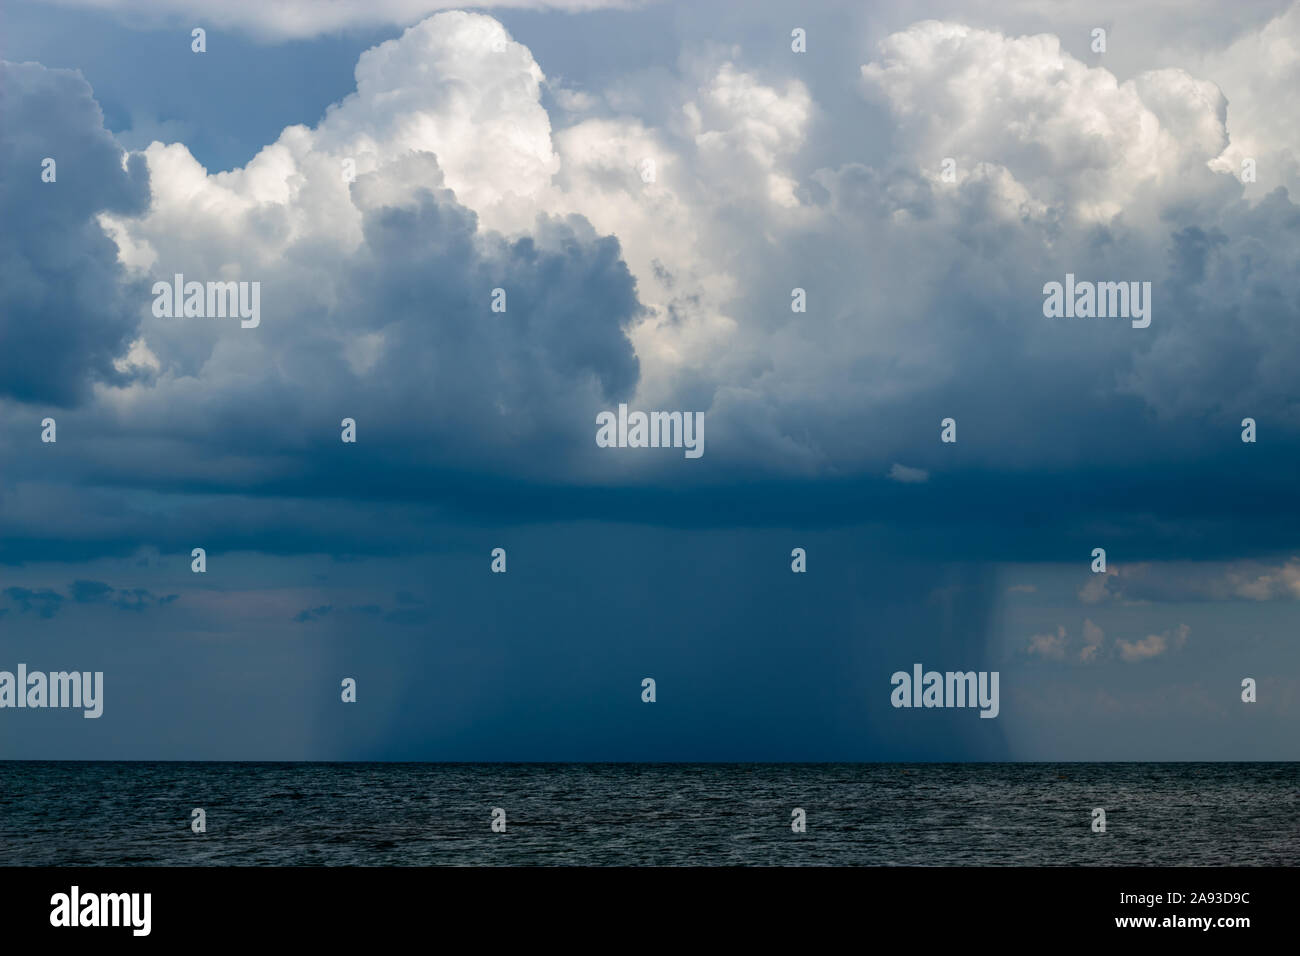 Thunderstorm on the horizon in the sea. Gray thunderclouds. In the distance, the size of the elements is clearly visible. Stock Photo